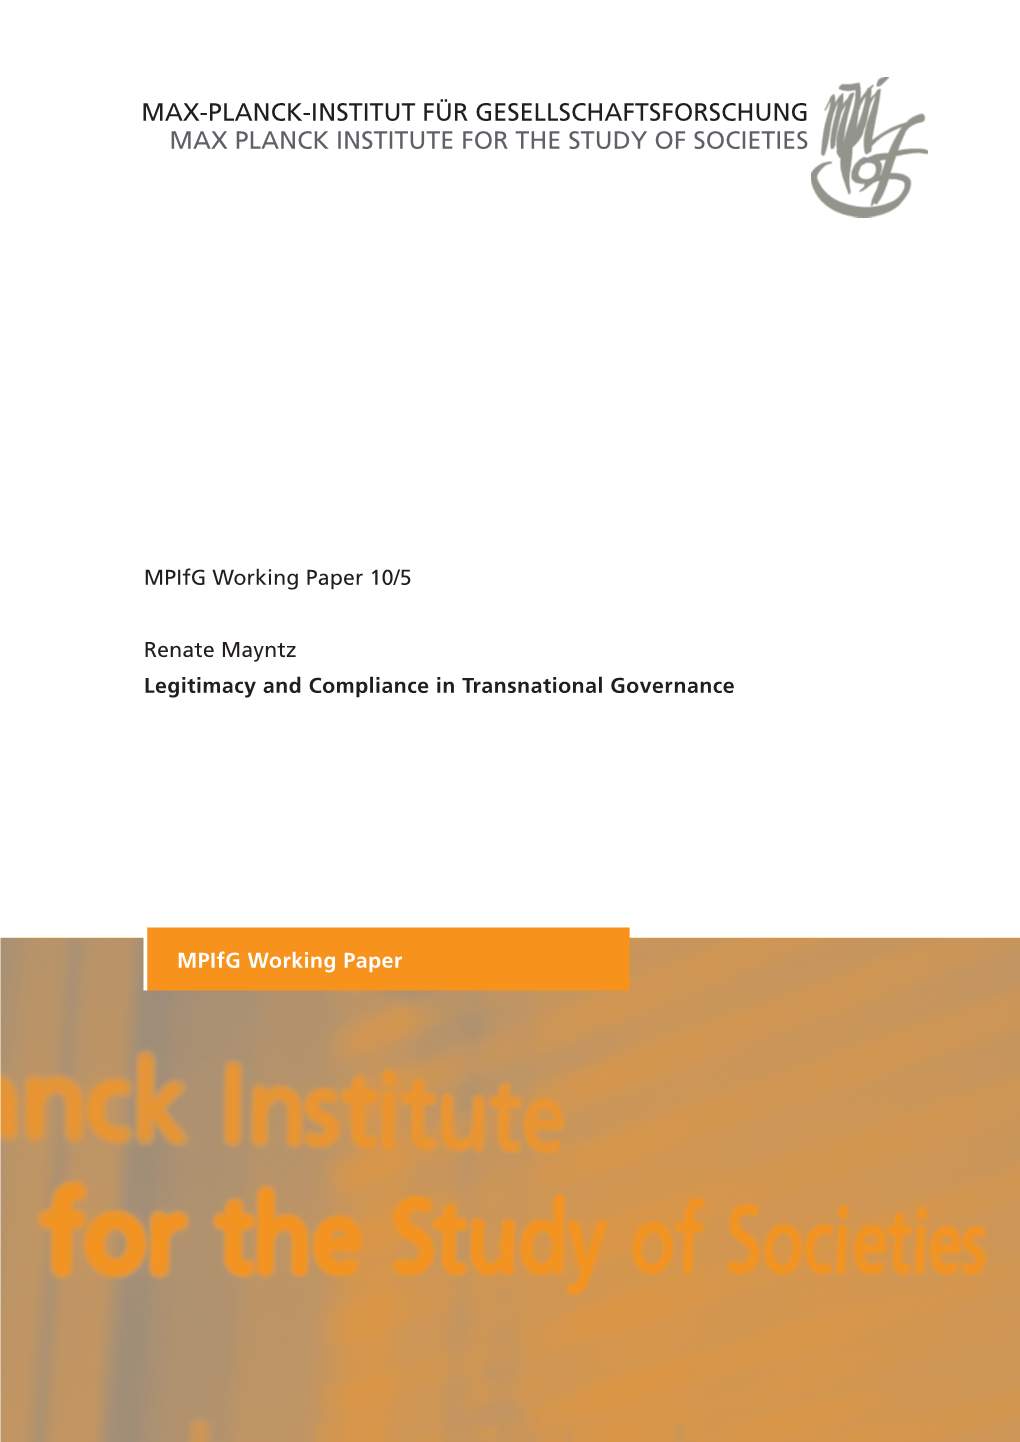 Legitimacy and Compliance in Transnational Governance